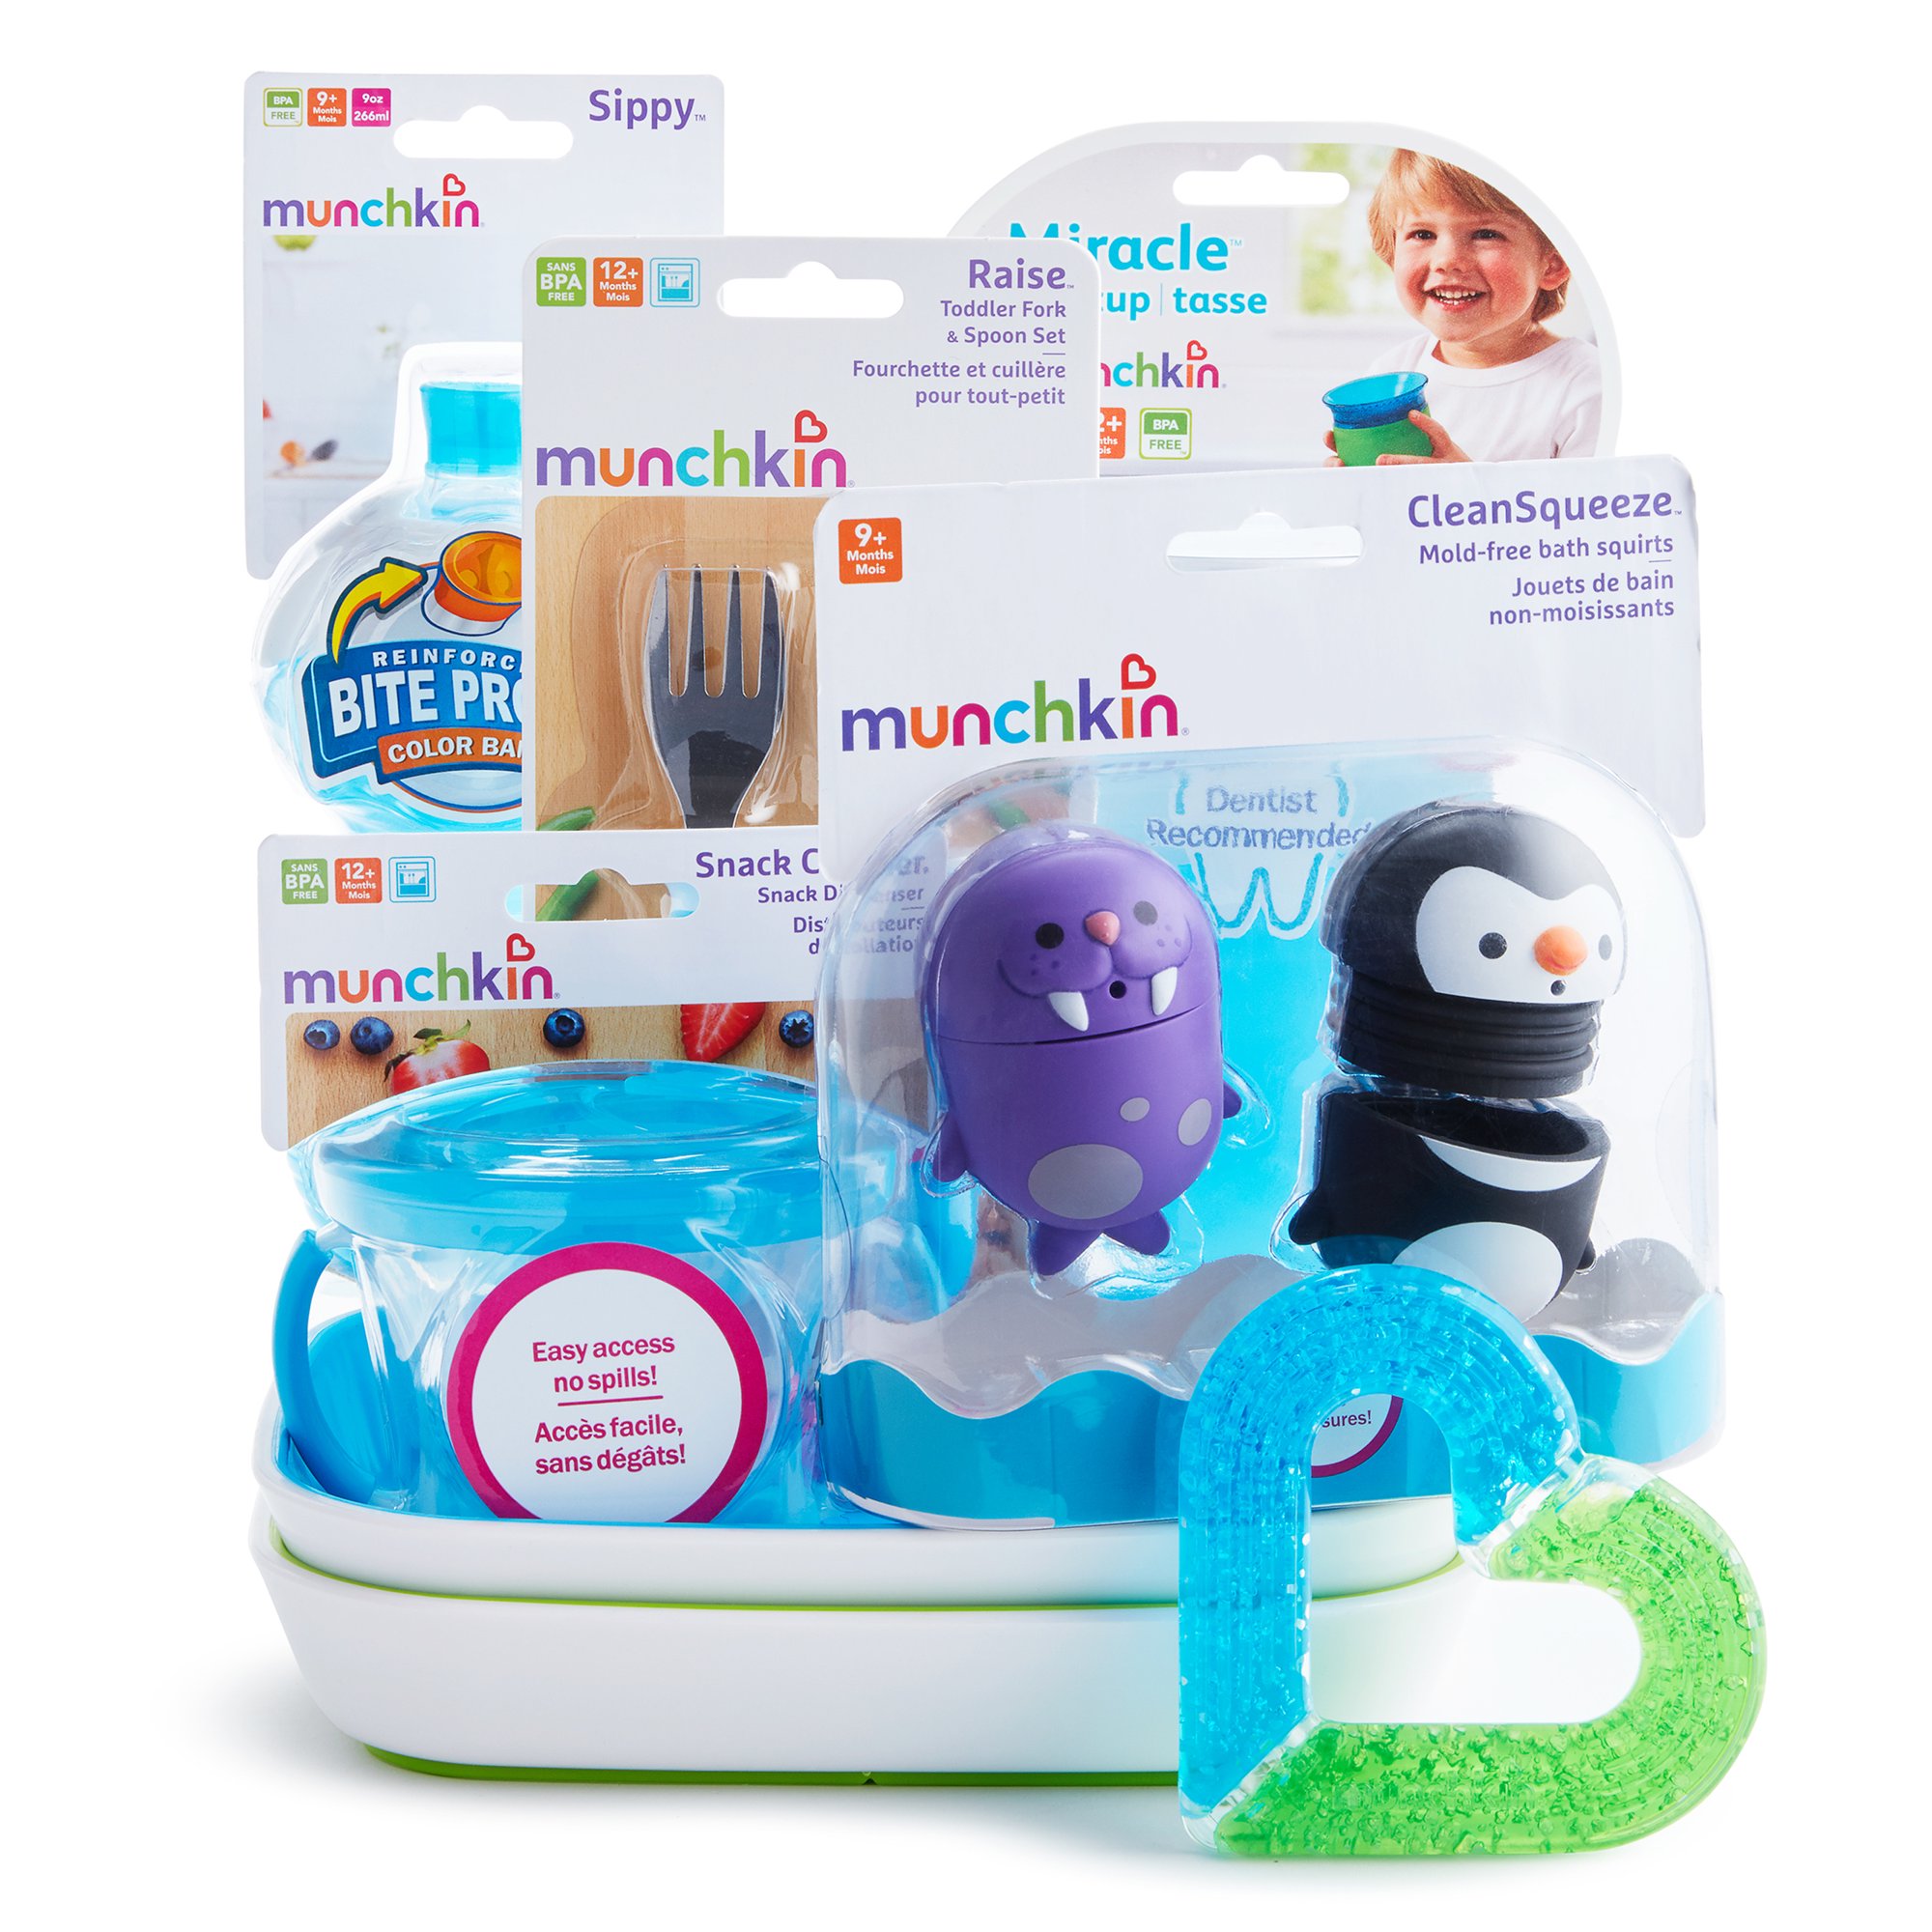 Munchkin 1st Birthday Gift Basket, Great for Baby Birthdays, Includes 7 Baby Products, Blue